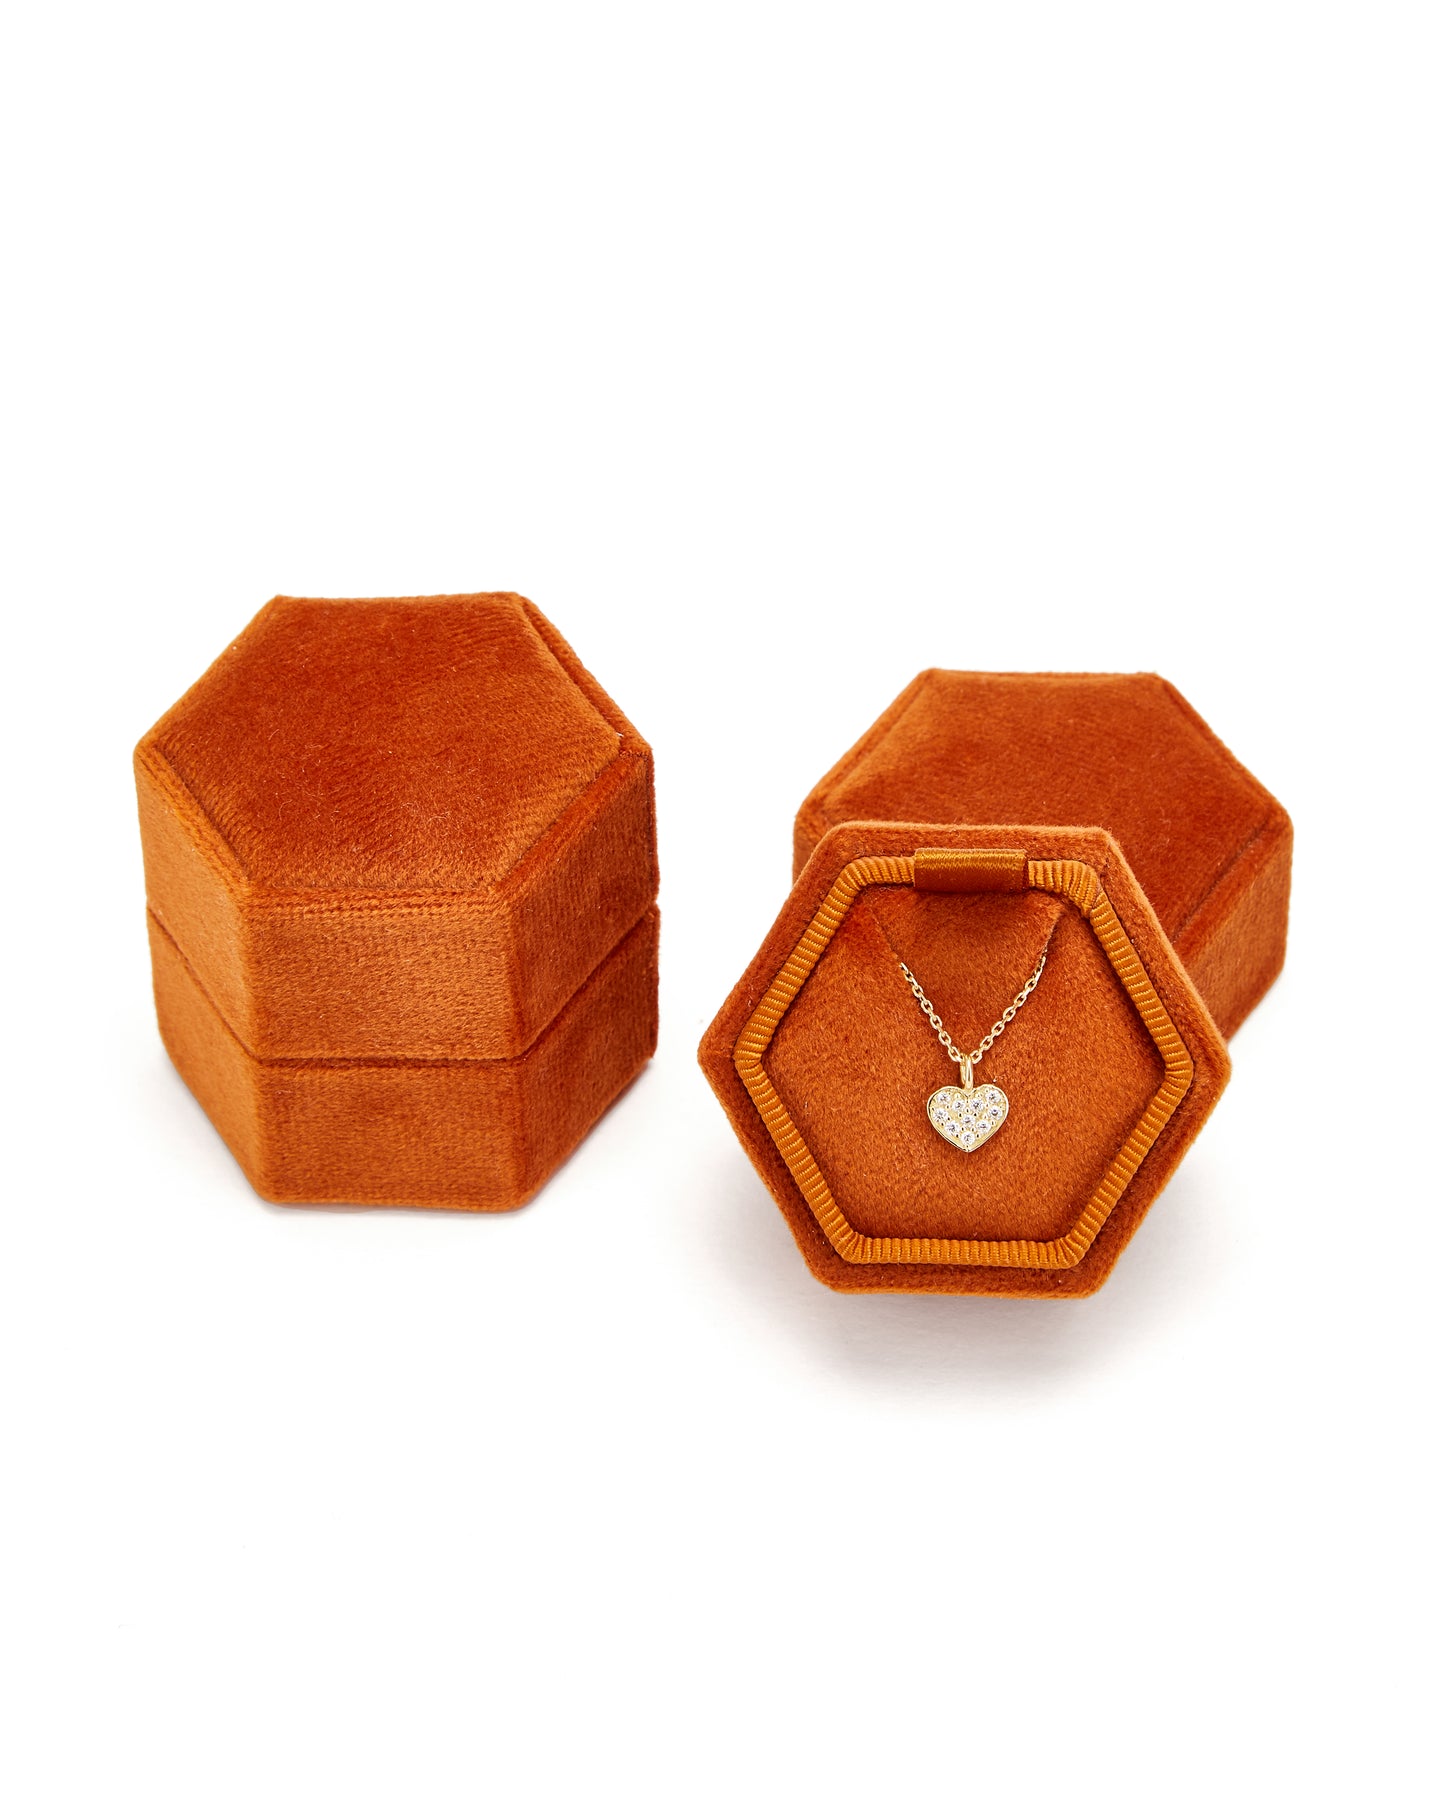 Jewelry case HEXAGON, 25 pieces, Inlay choice: necklace/ear studs/creoles